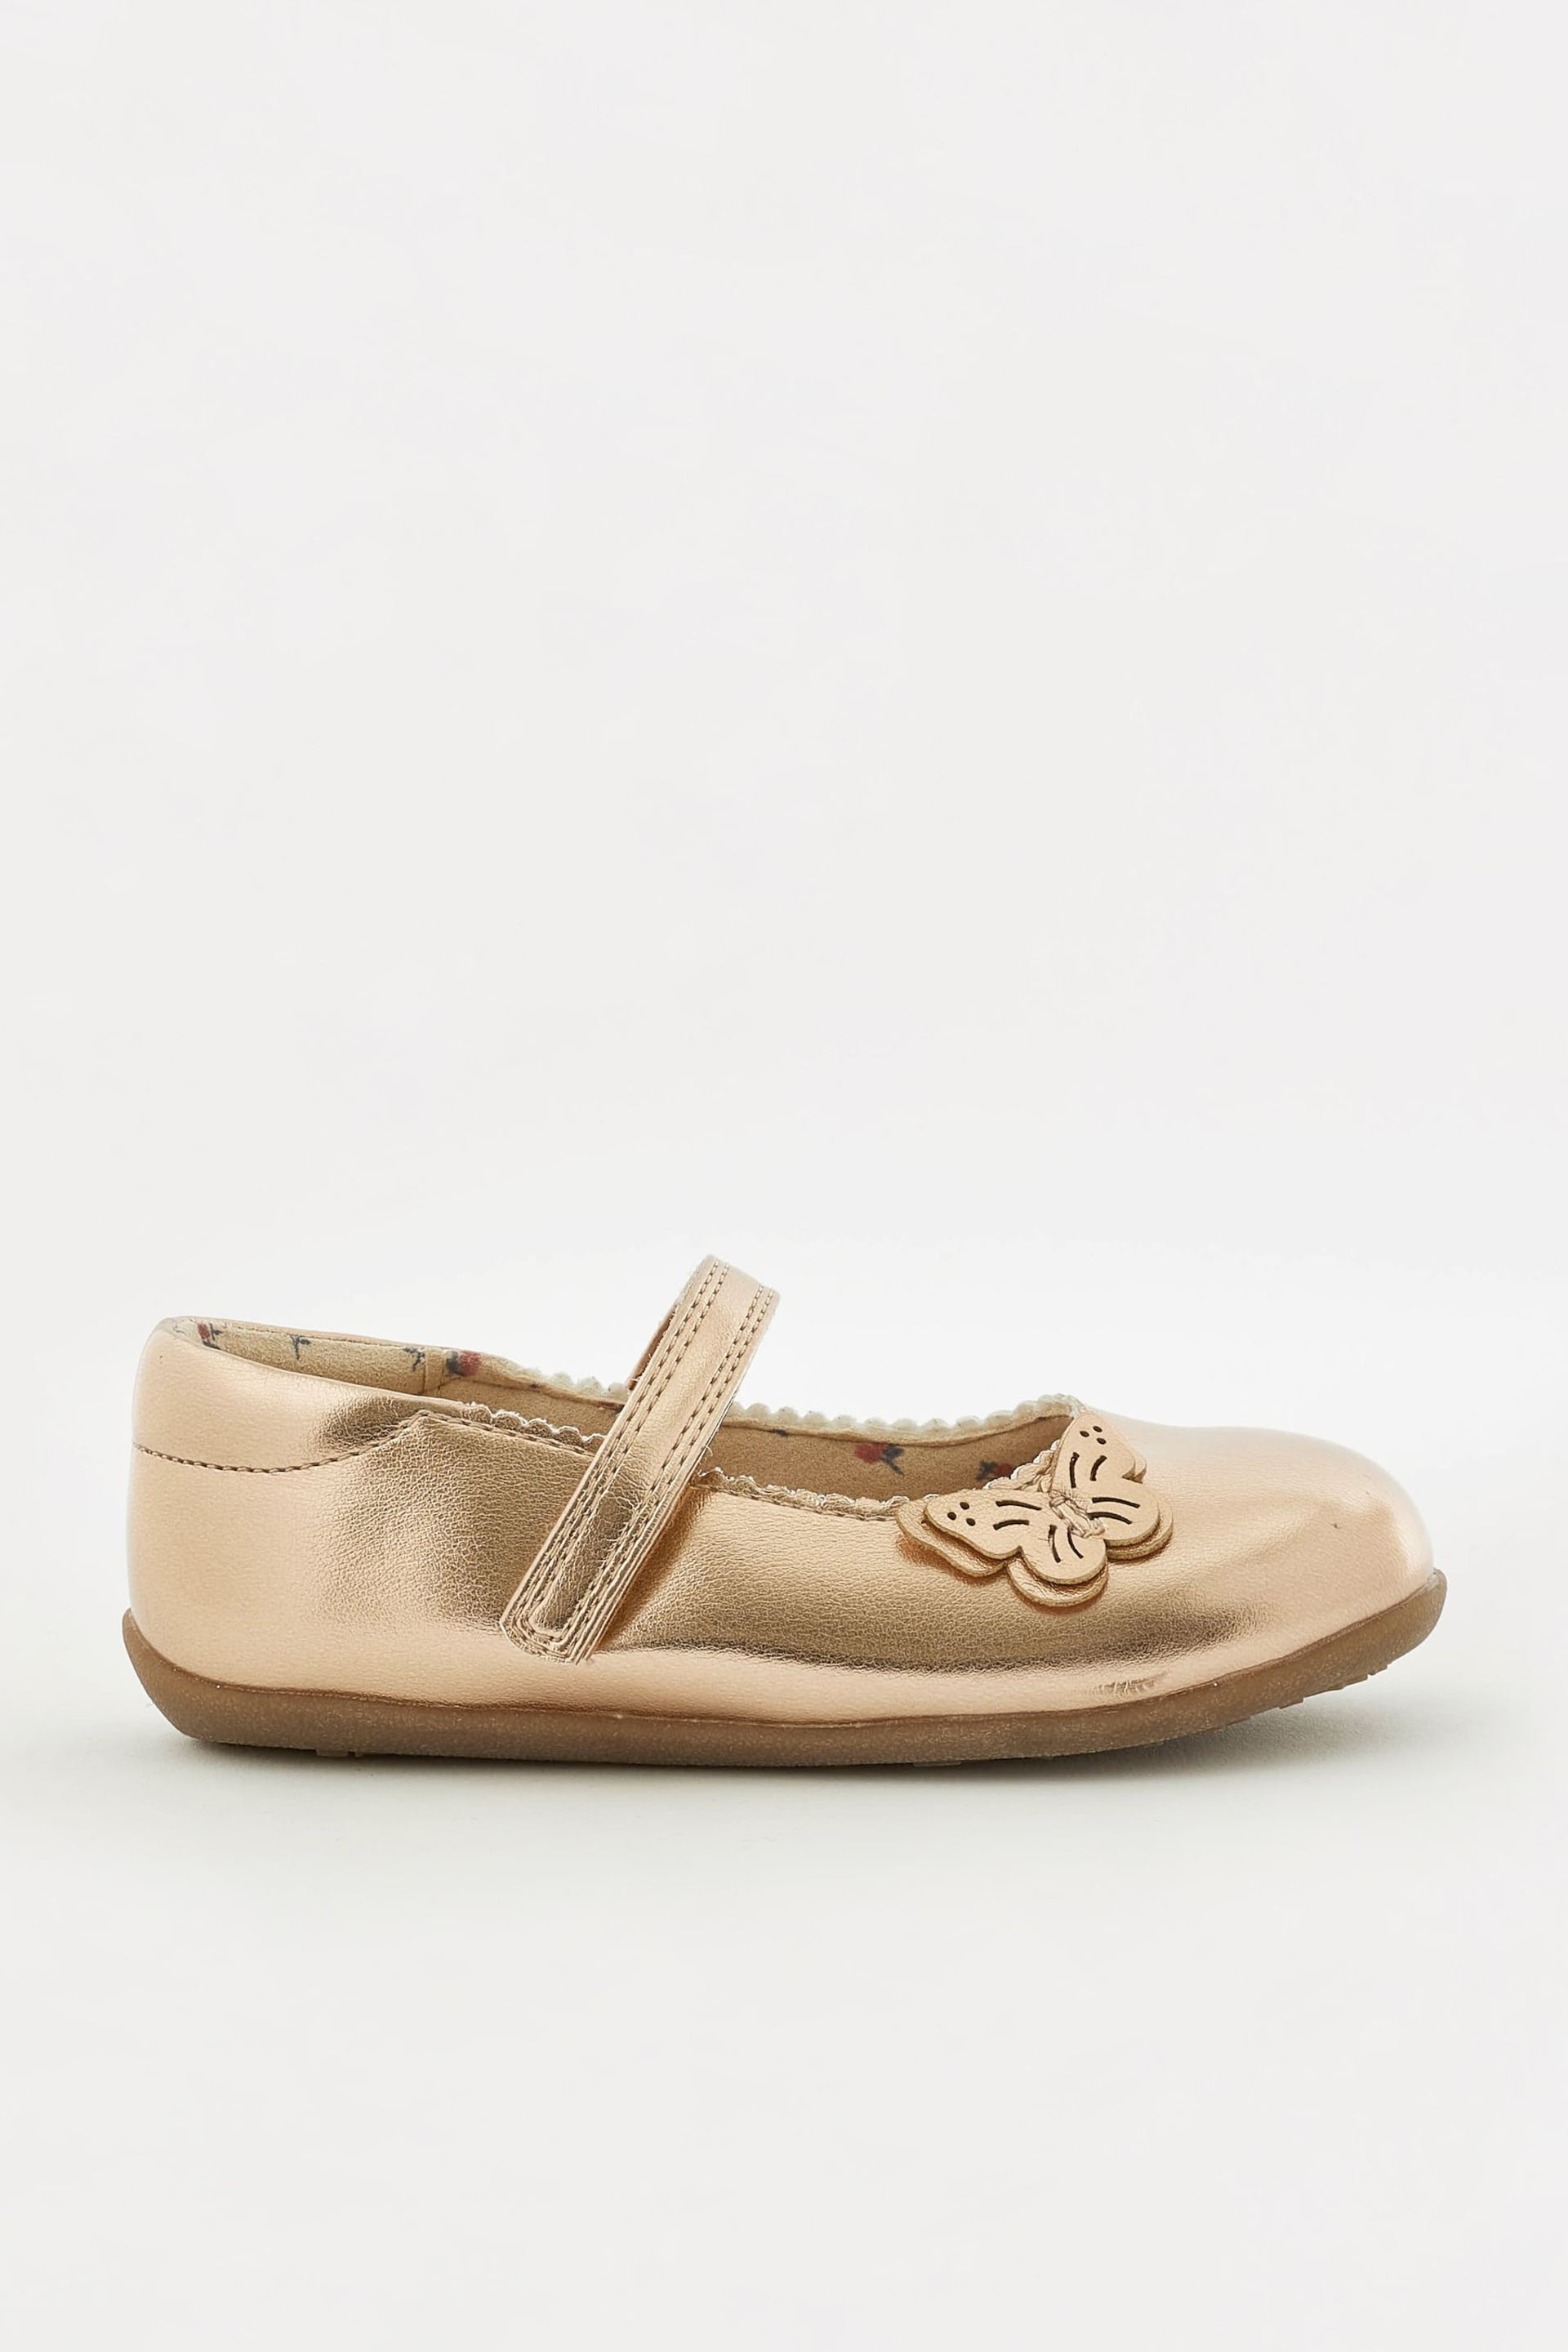 Rose Gold Wide Fit (G) Butterfly Mary Jane Shoes - Image 1 of 5